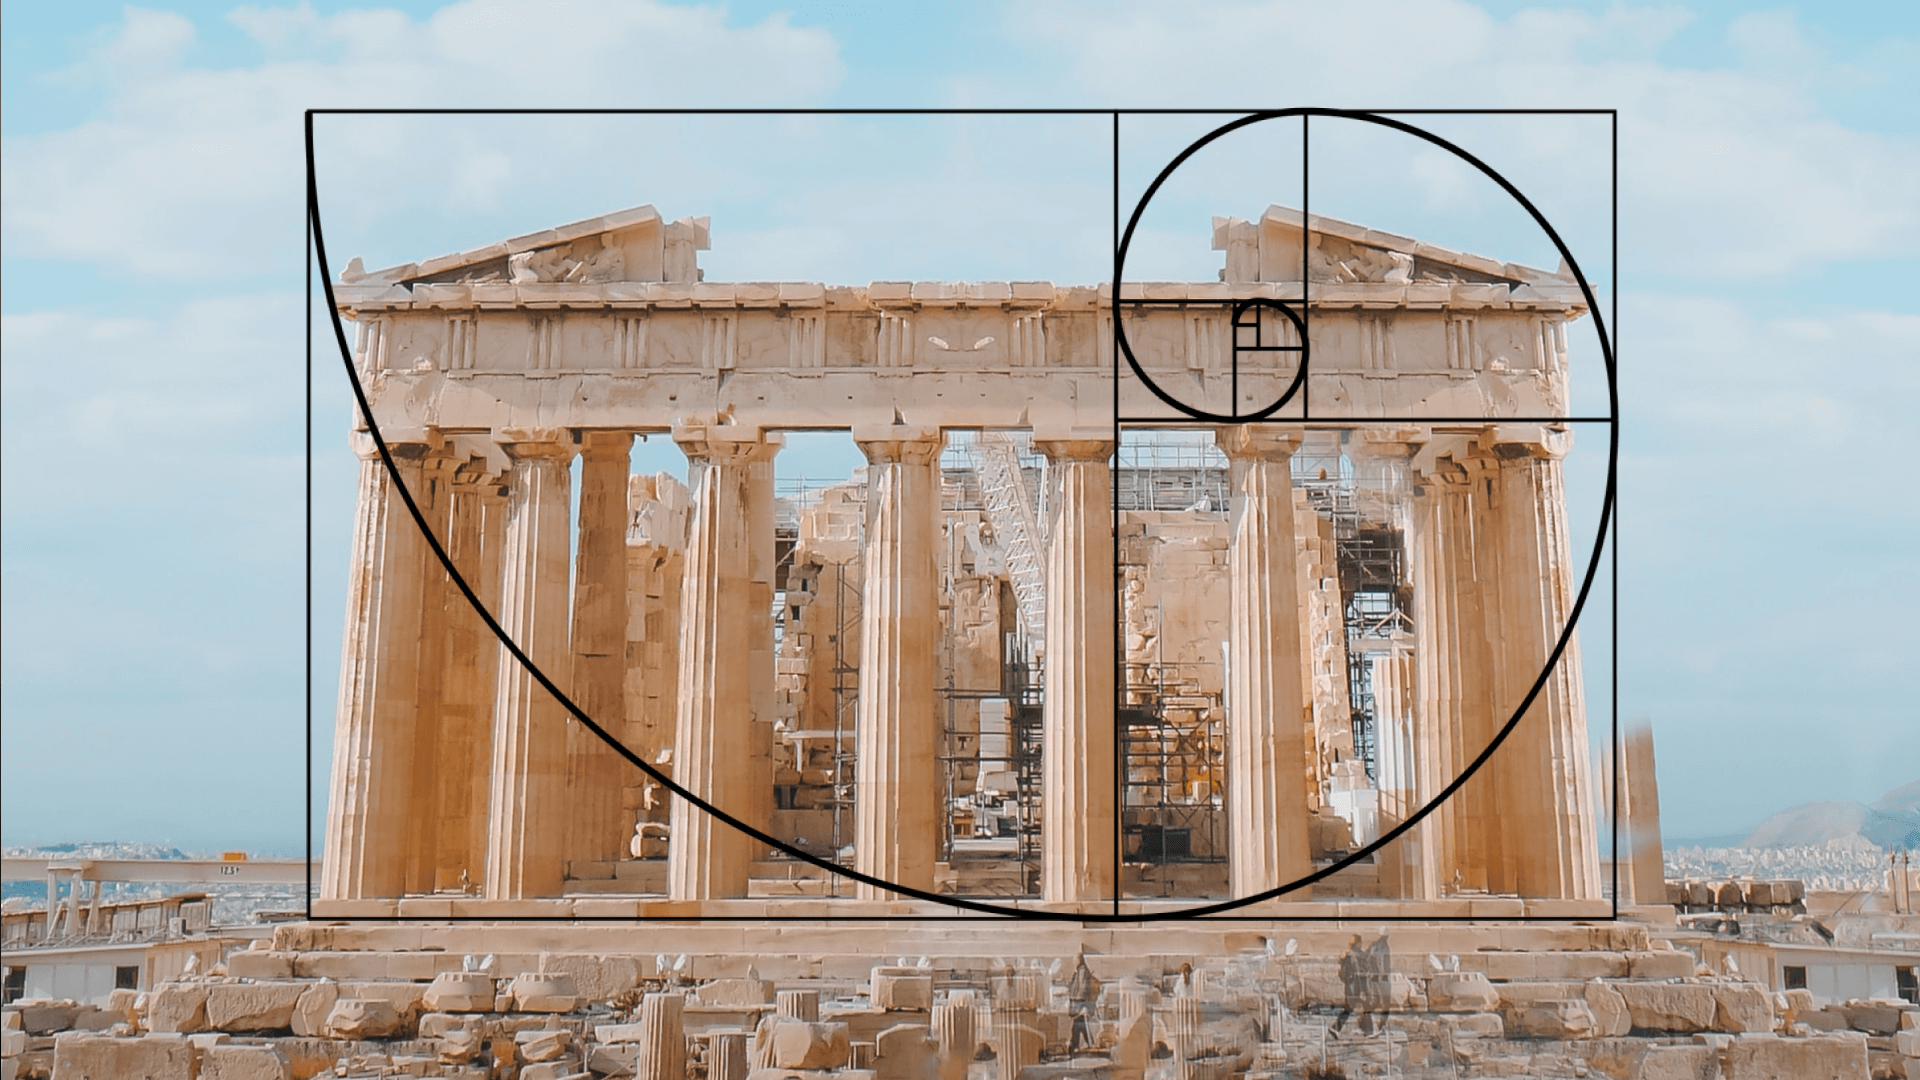 How Does The Golden Ratio Influence Architectural Design?